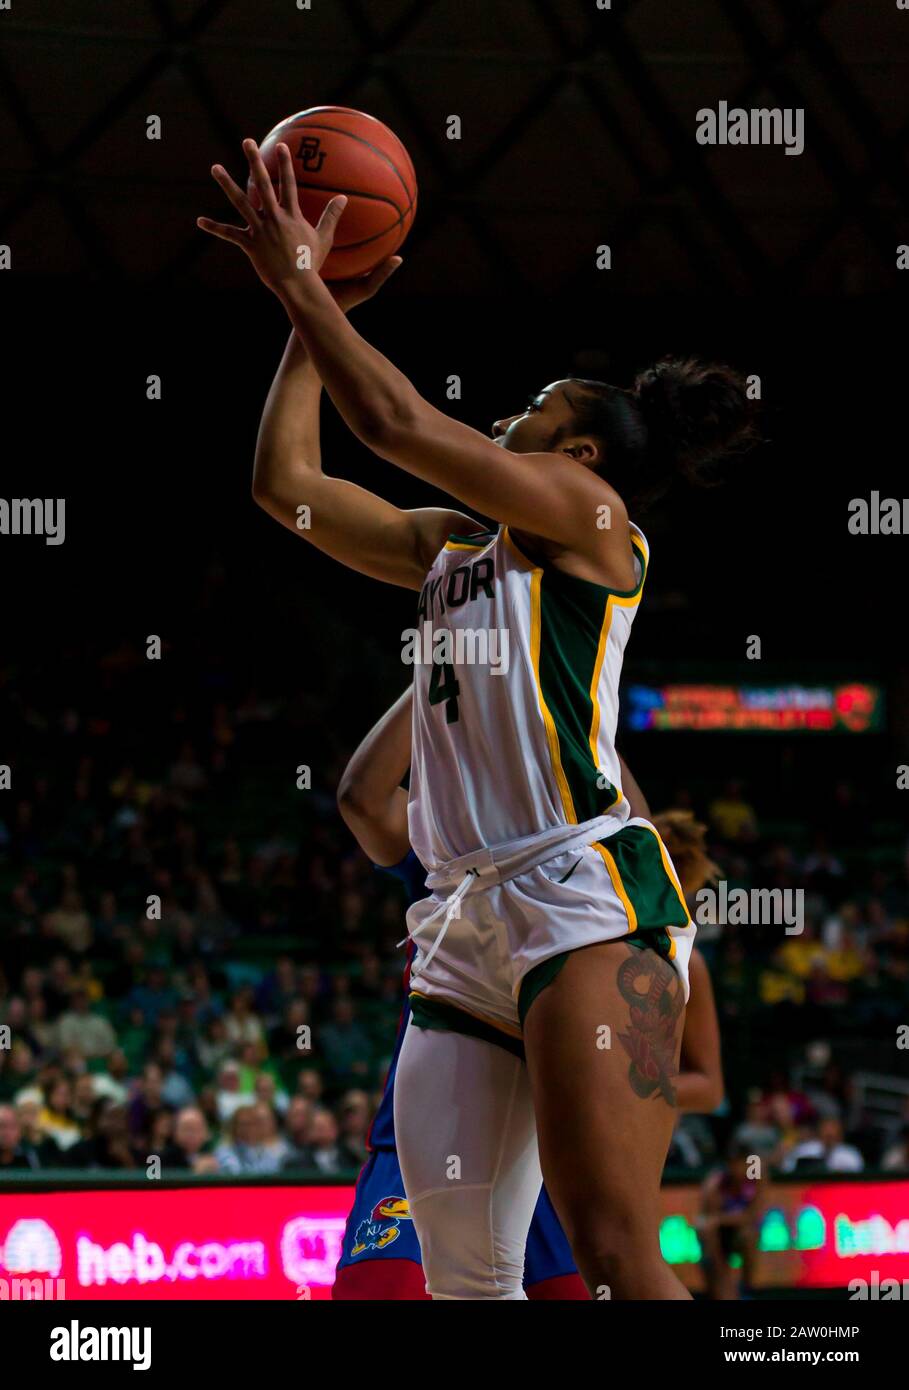 Waco, Texas, USA. 5th Feb, 2020. Baylor Lady Bears guard Te'a Cooper (4)  shoots the ball during the 2nd half of the NCAA Women's Basketball game  between Kansas Jayhawks and the Baylor